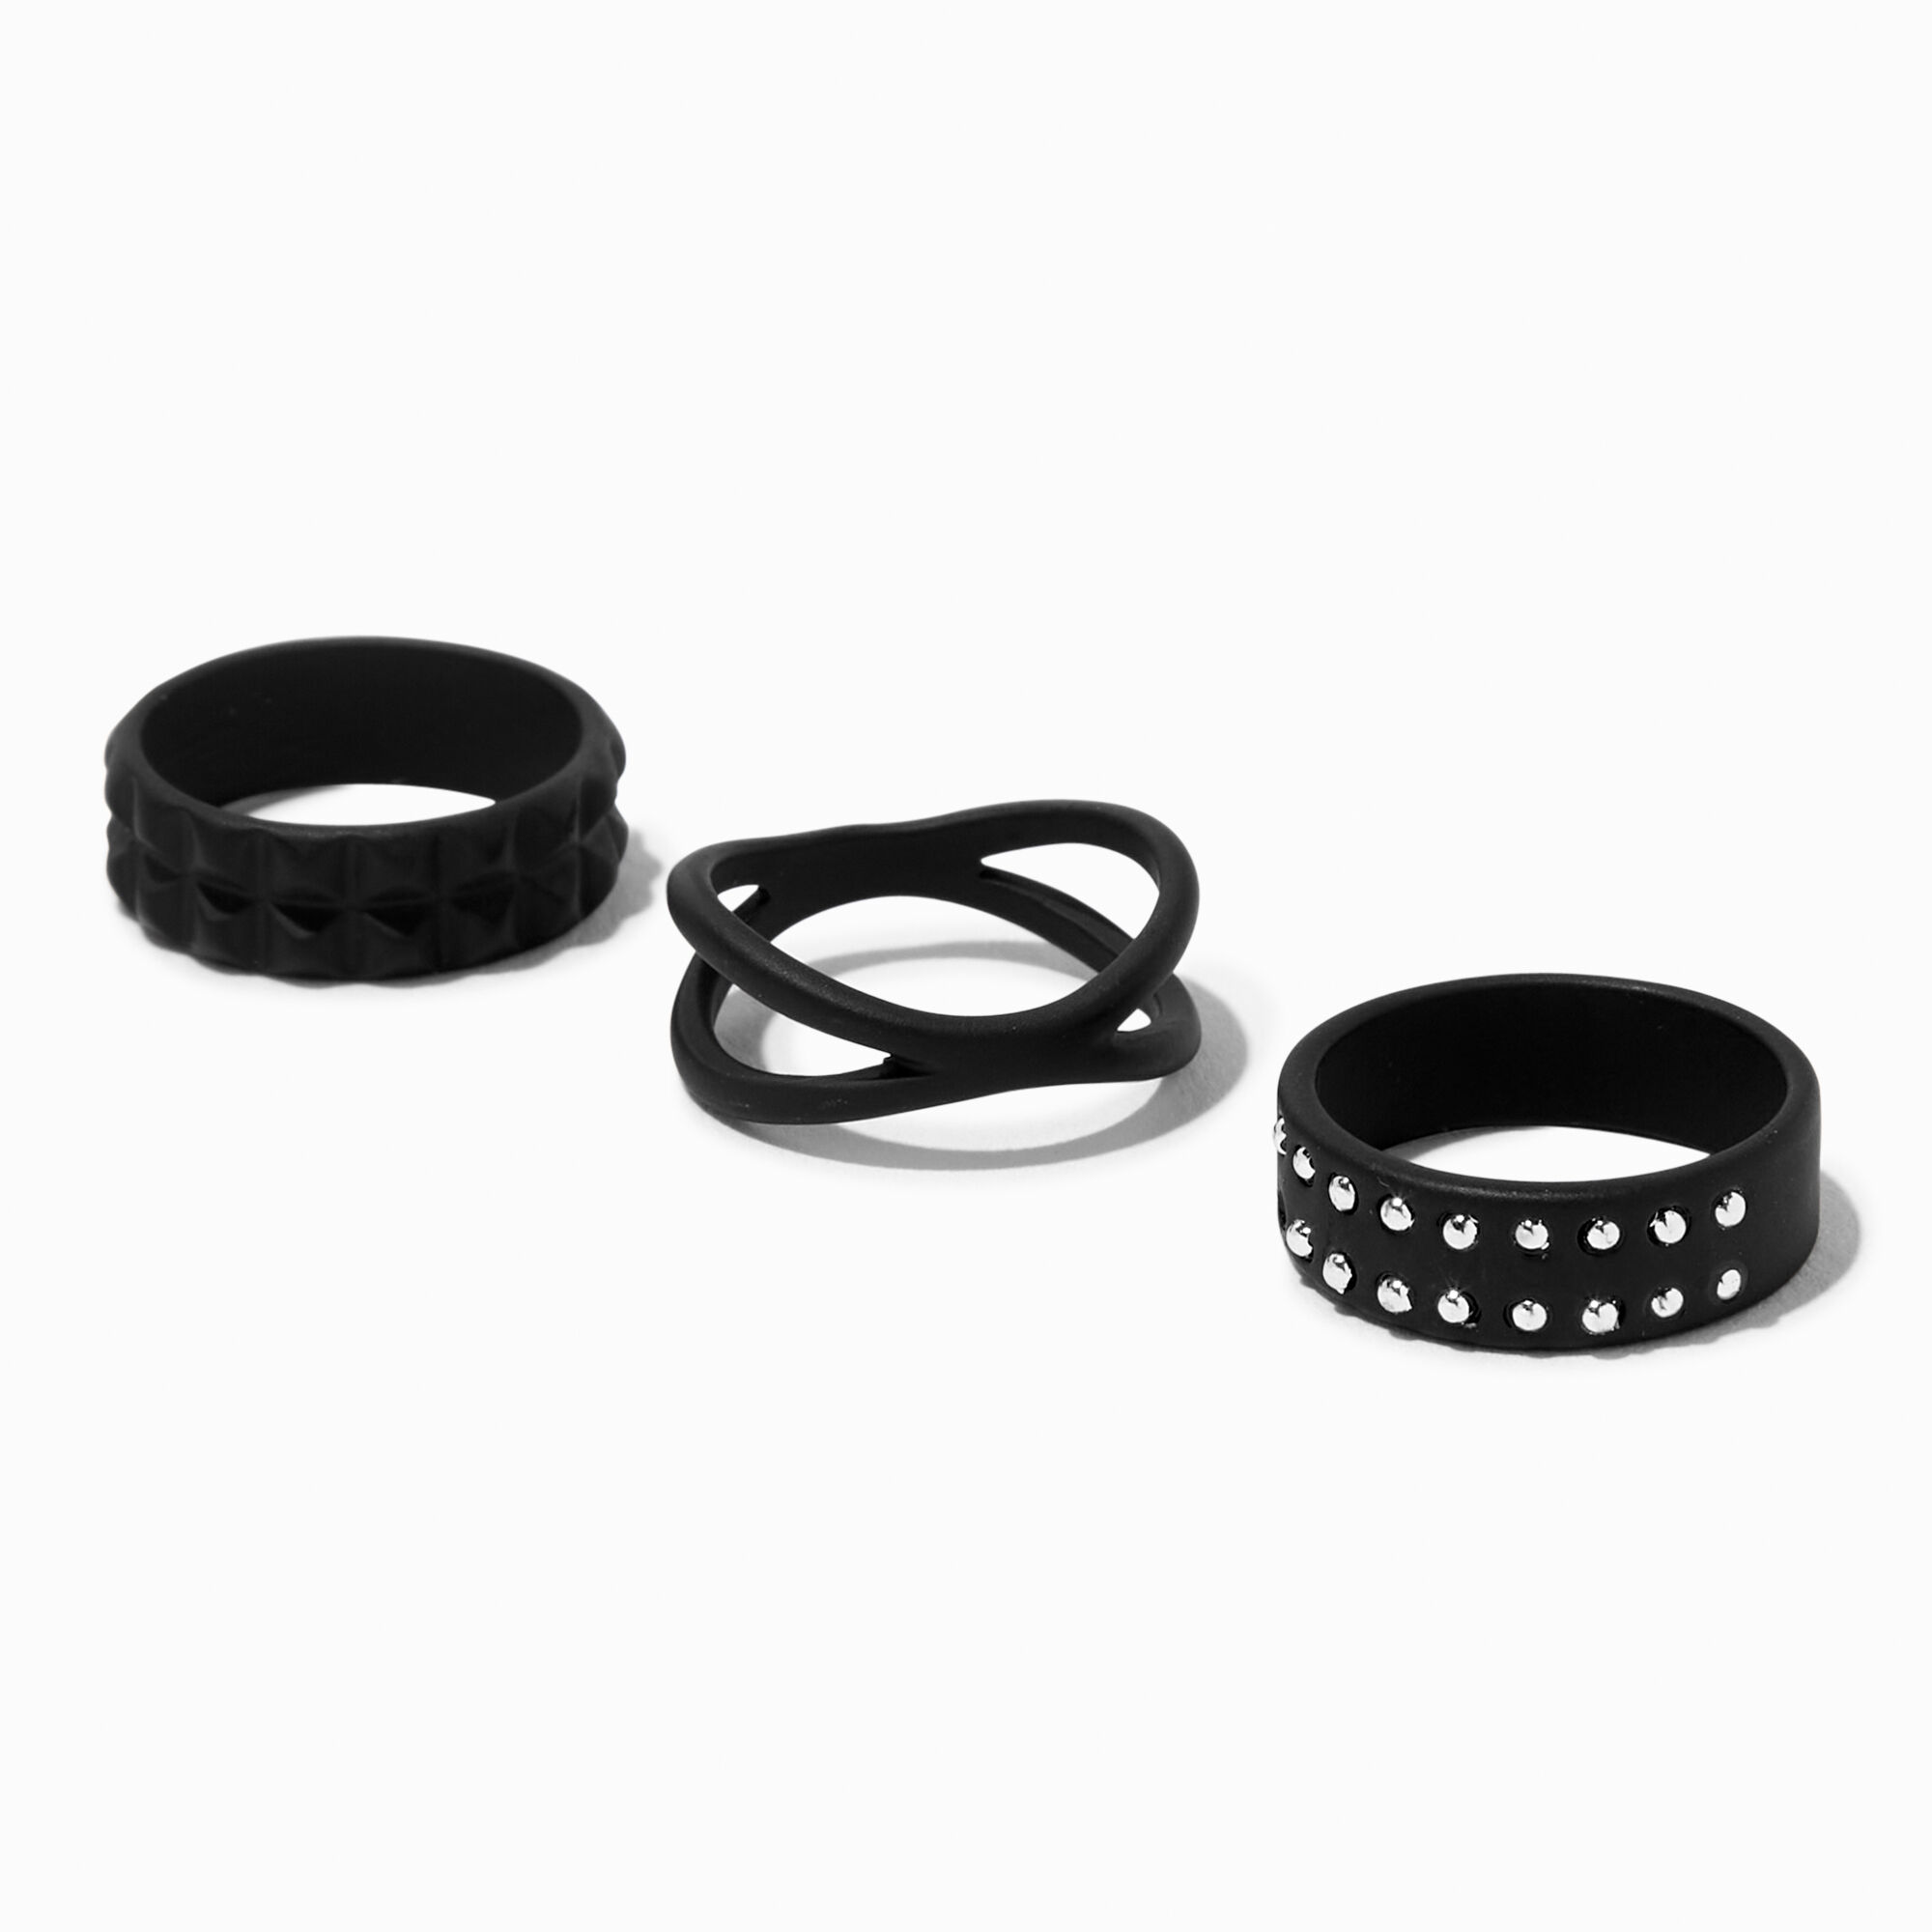 View Claires Pyramid Ring Set 3 Pack Black information